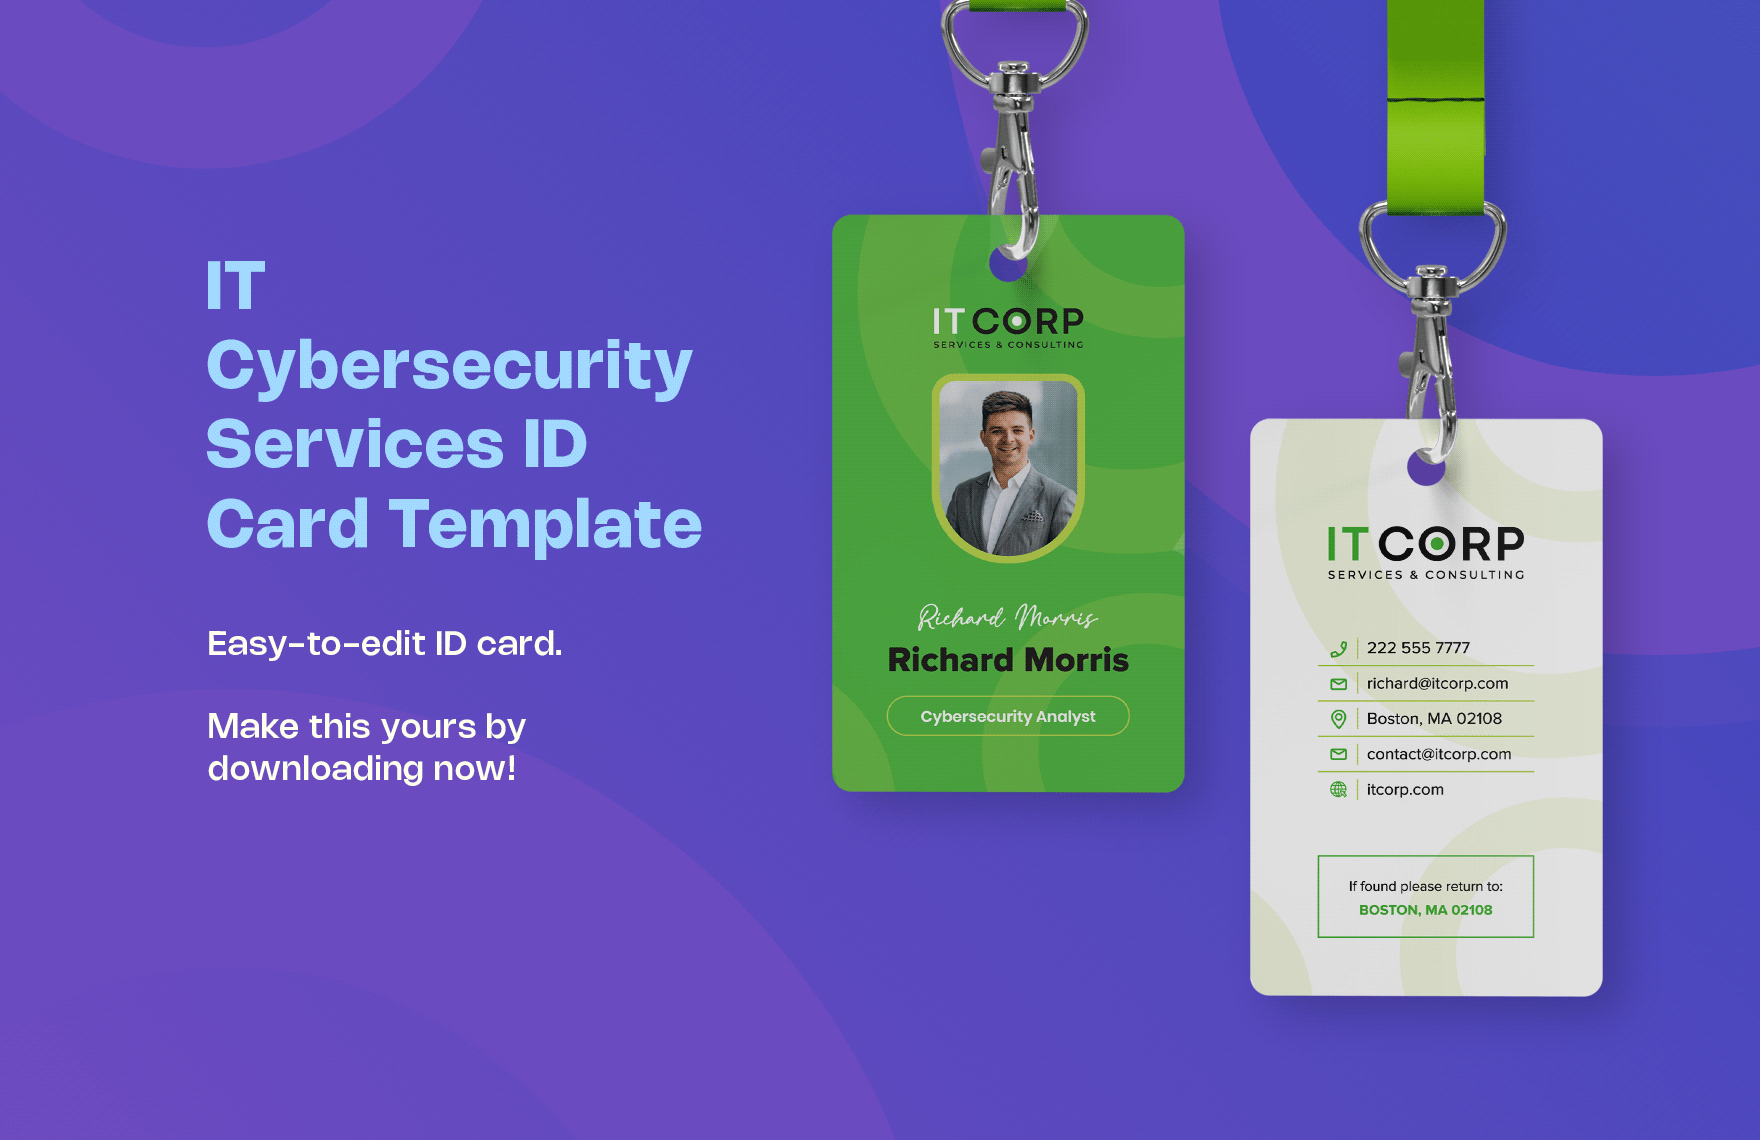 IT Cybersecurity Services ID Card Template